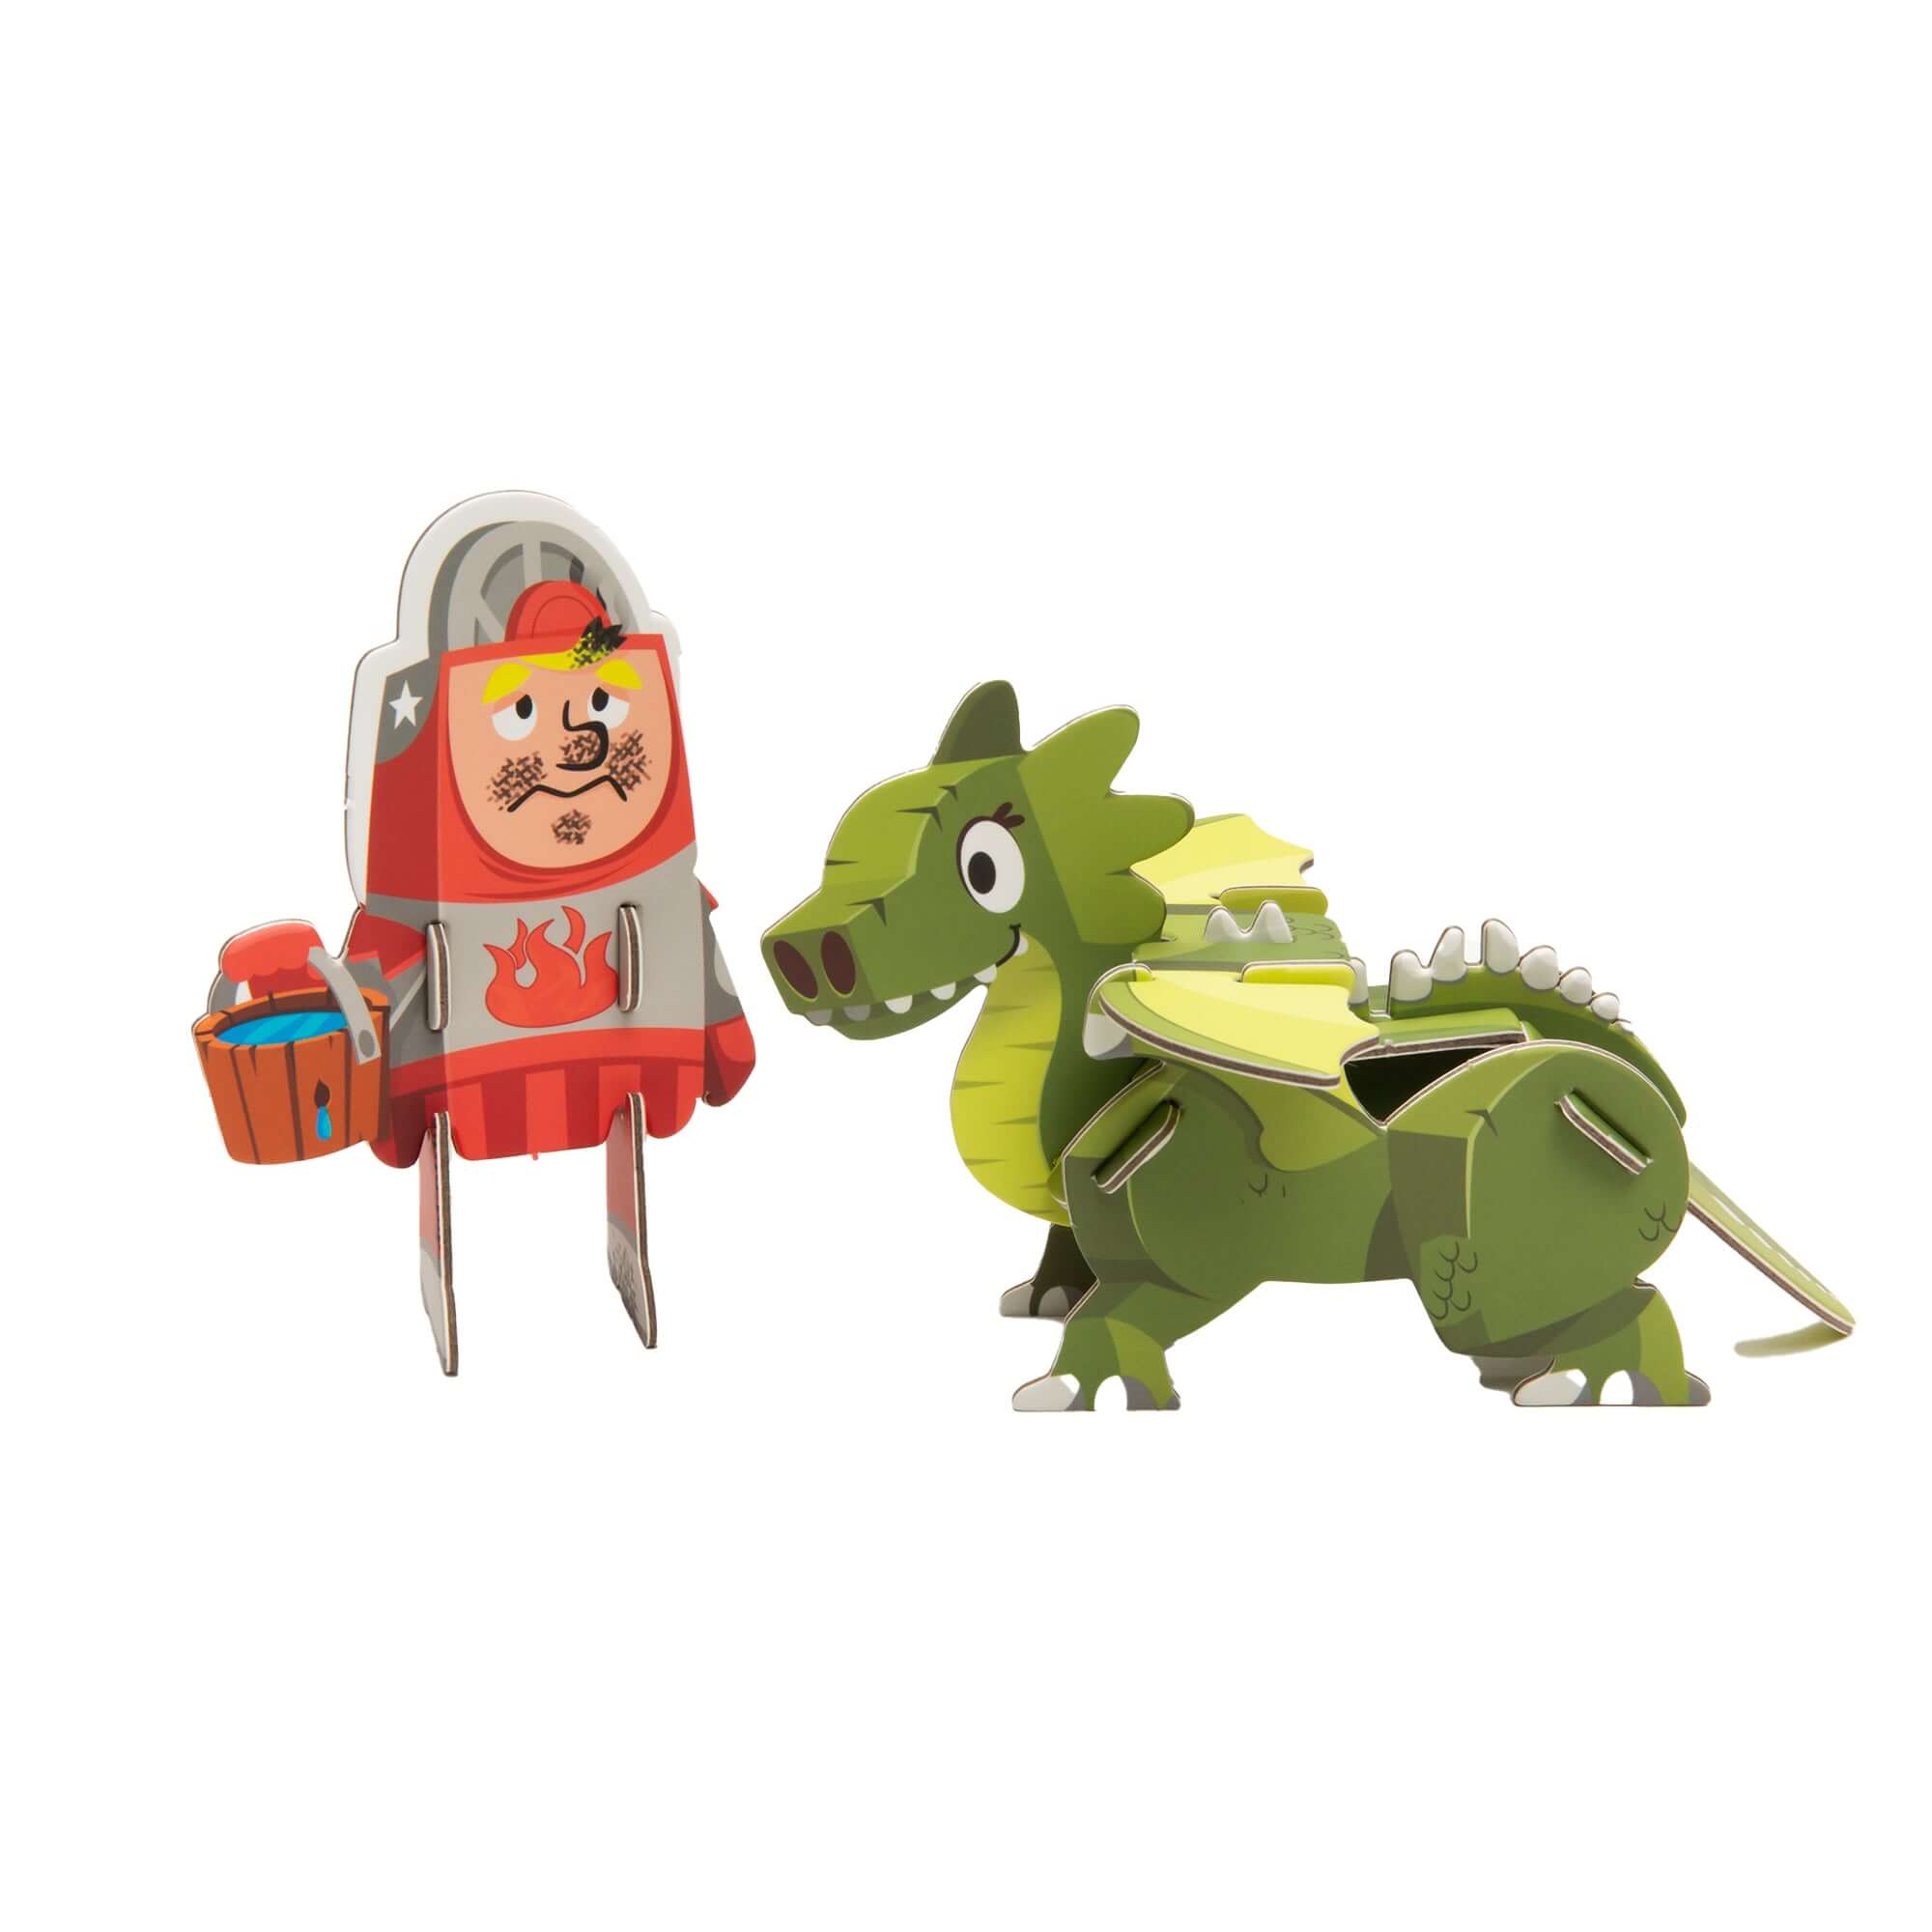 buildable figurine characters including binky the dragon